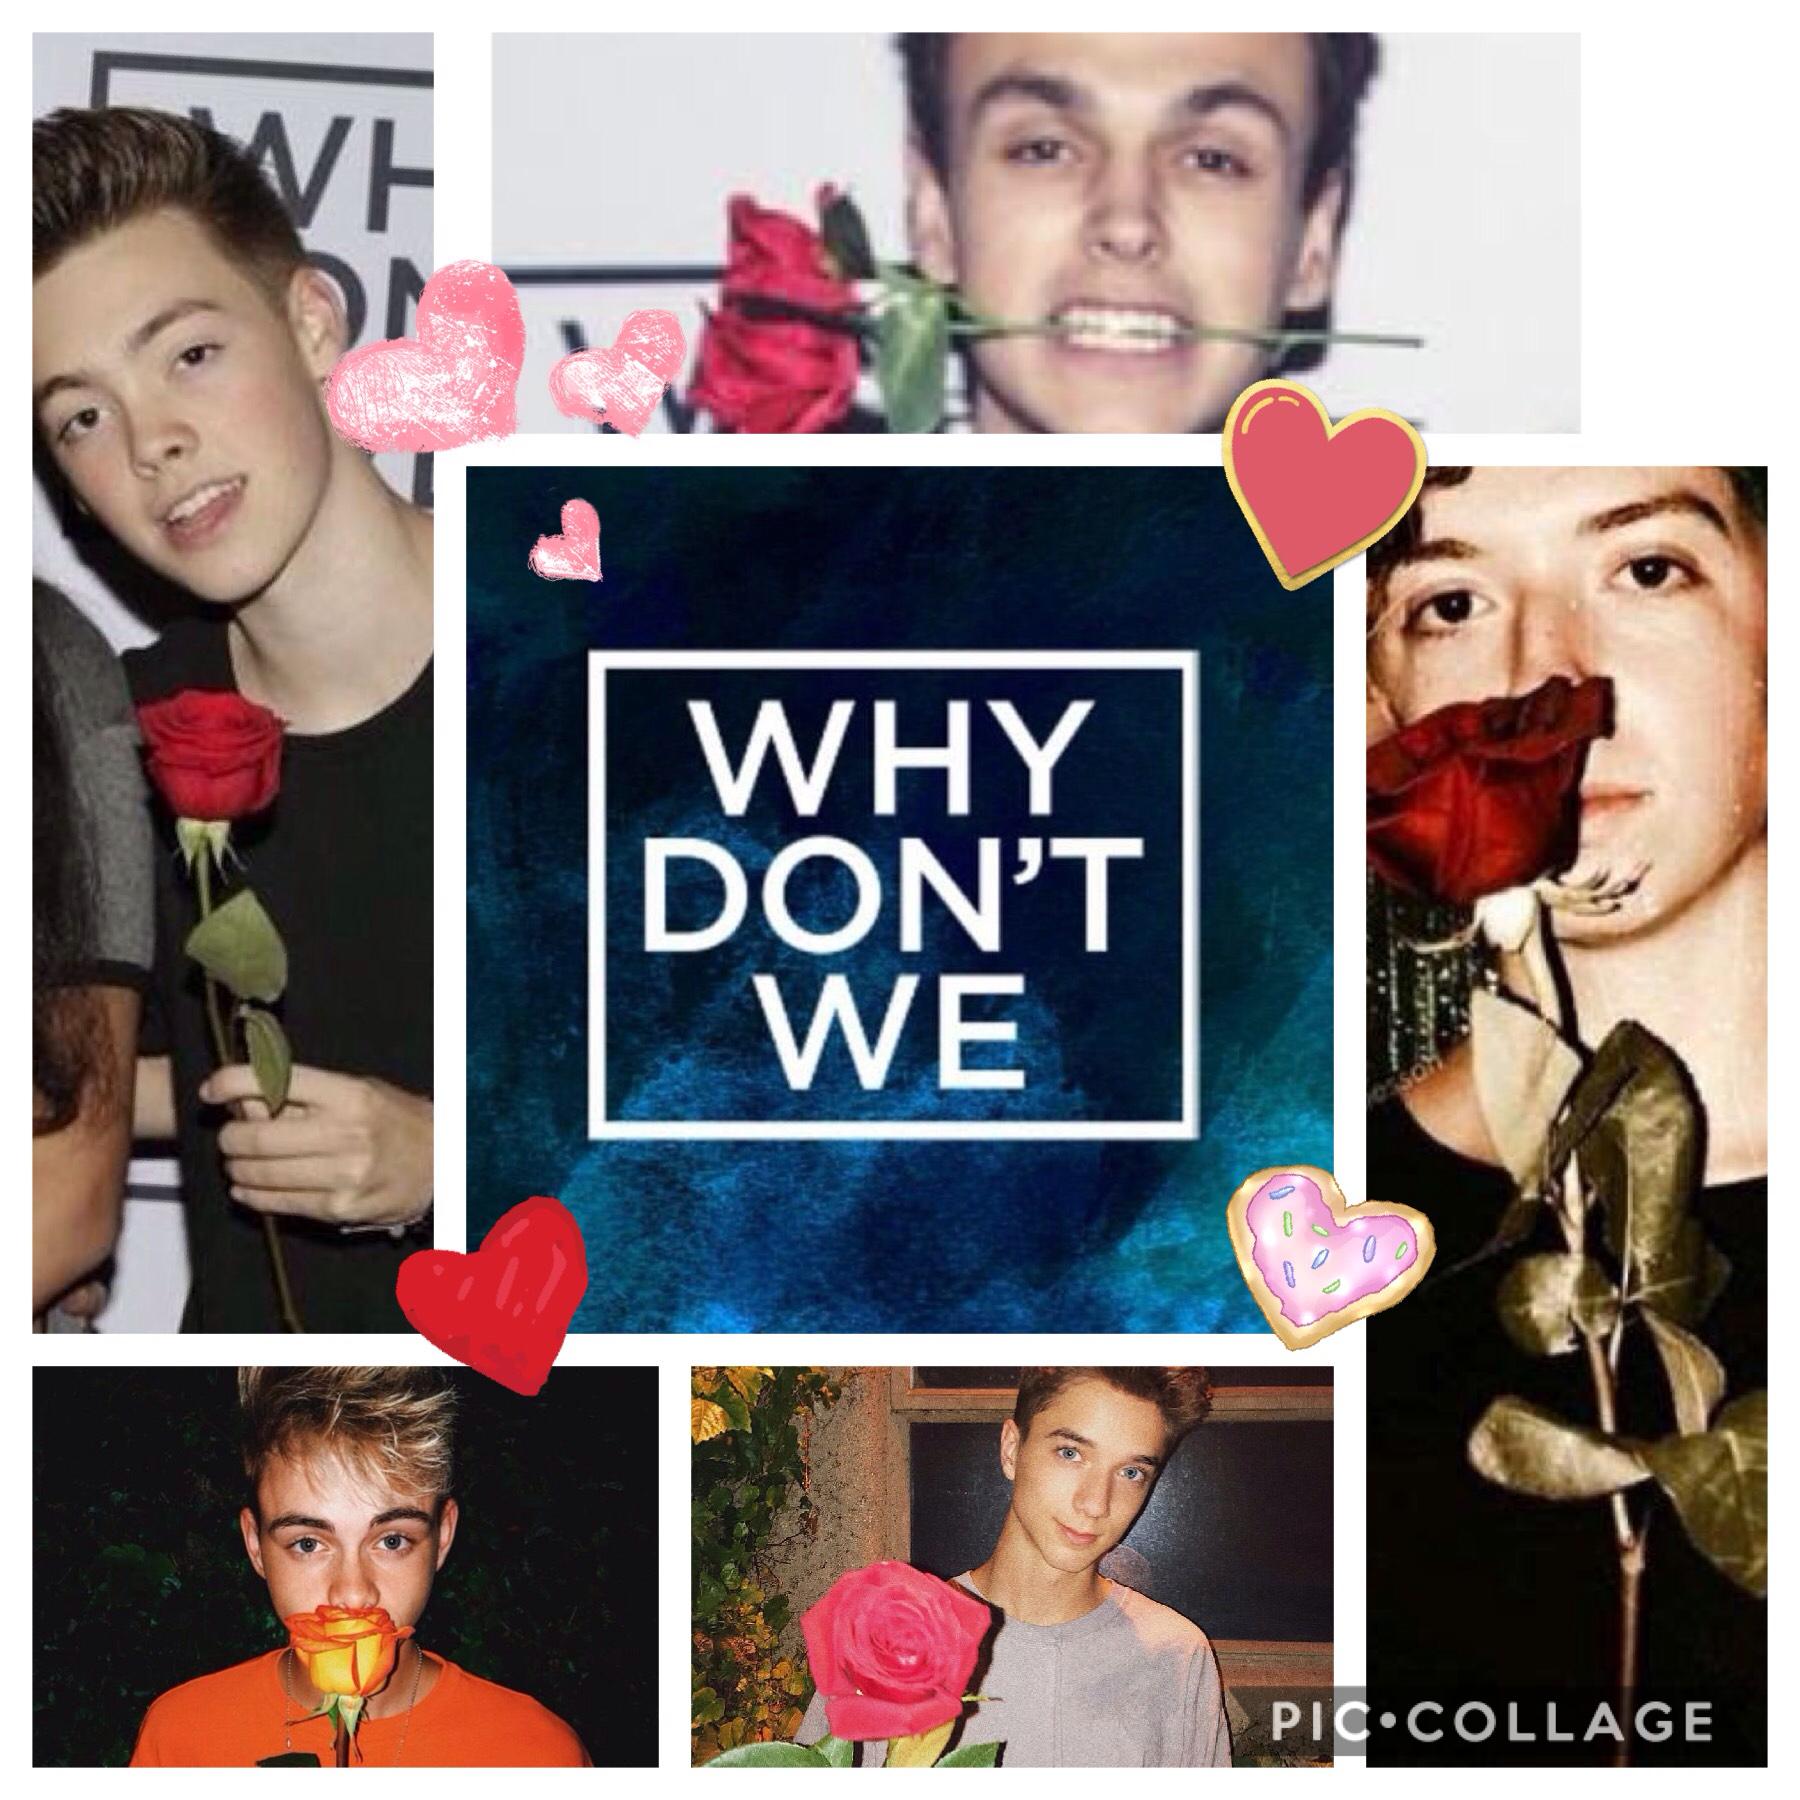 Why Don't We. Handing us all roses ❤️💛💚💙💜